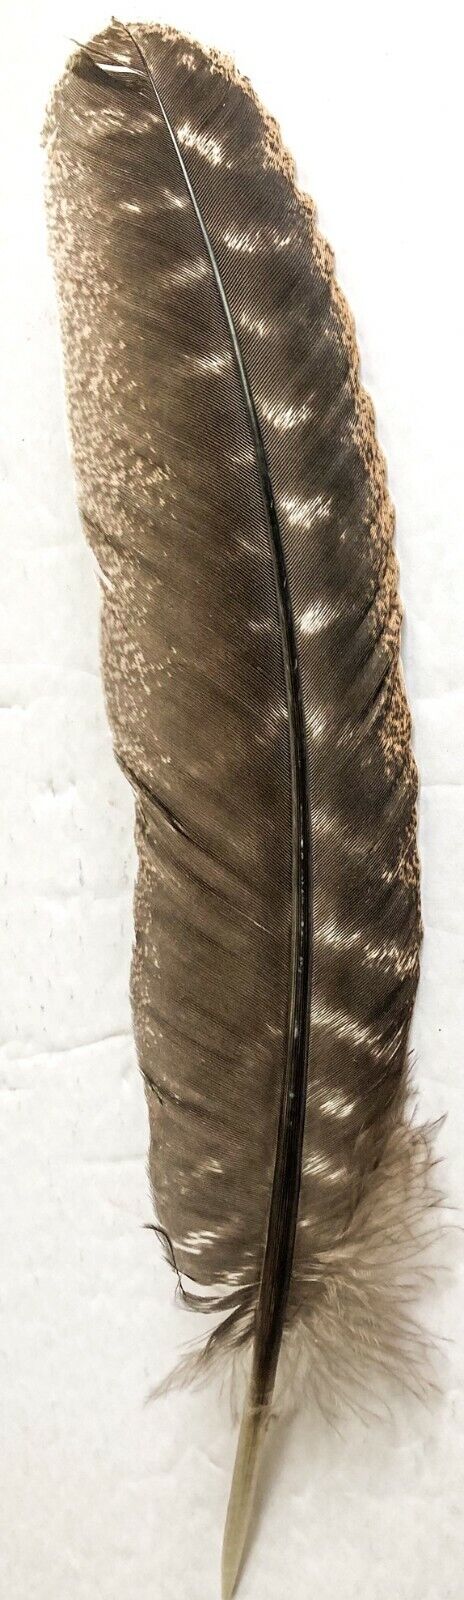 Smudge Feather Natural Wild Turkey Barred  9 - 12 inch for Smudging Blessing